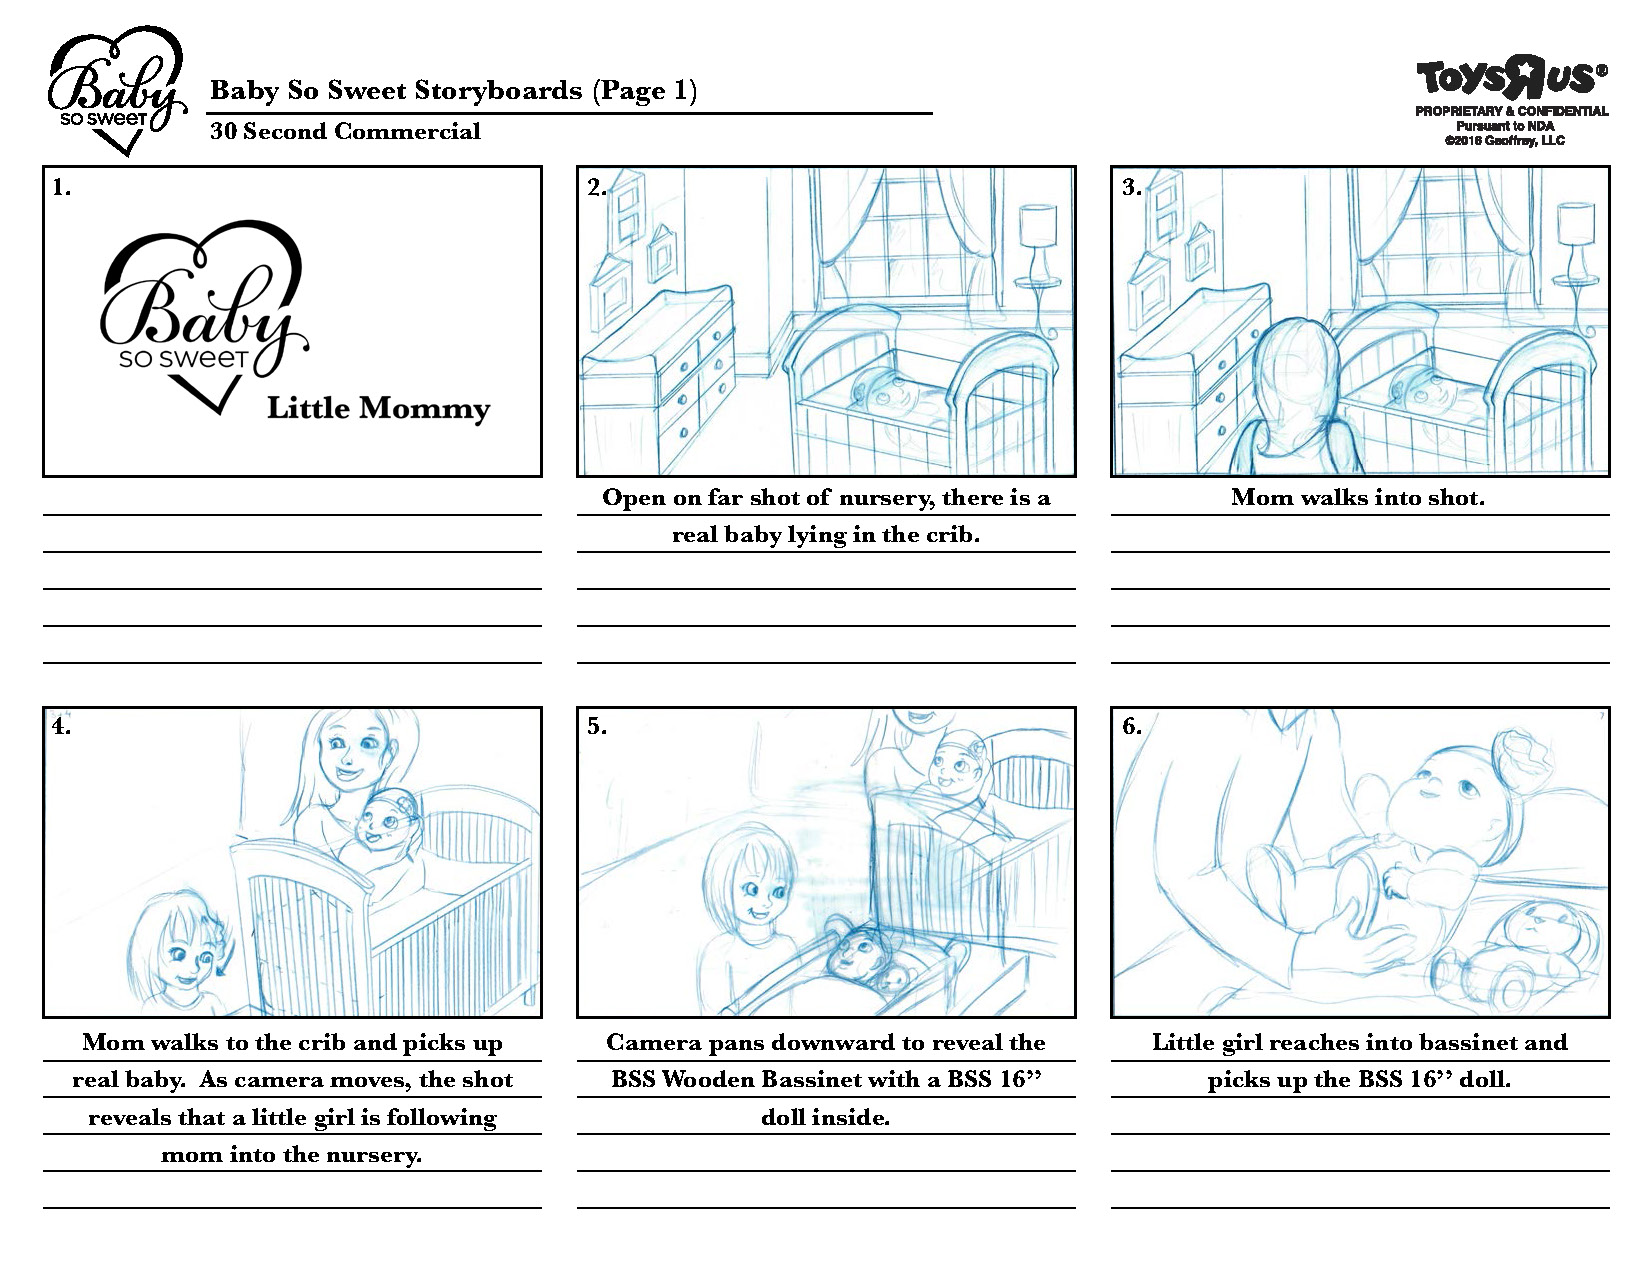 BSS_Storyboards_Page_1.jpg